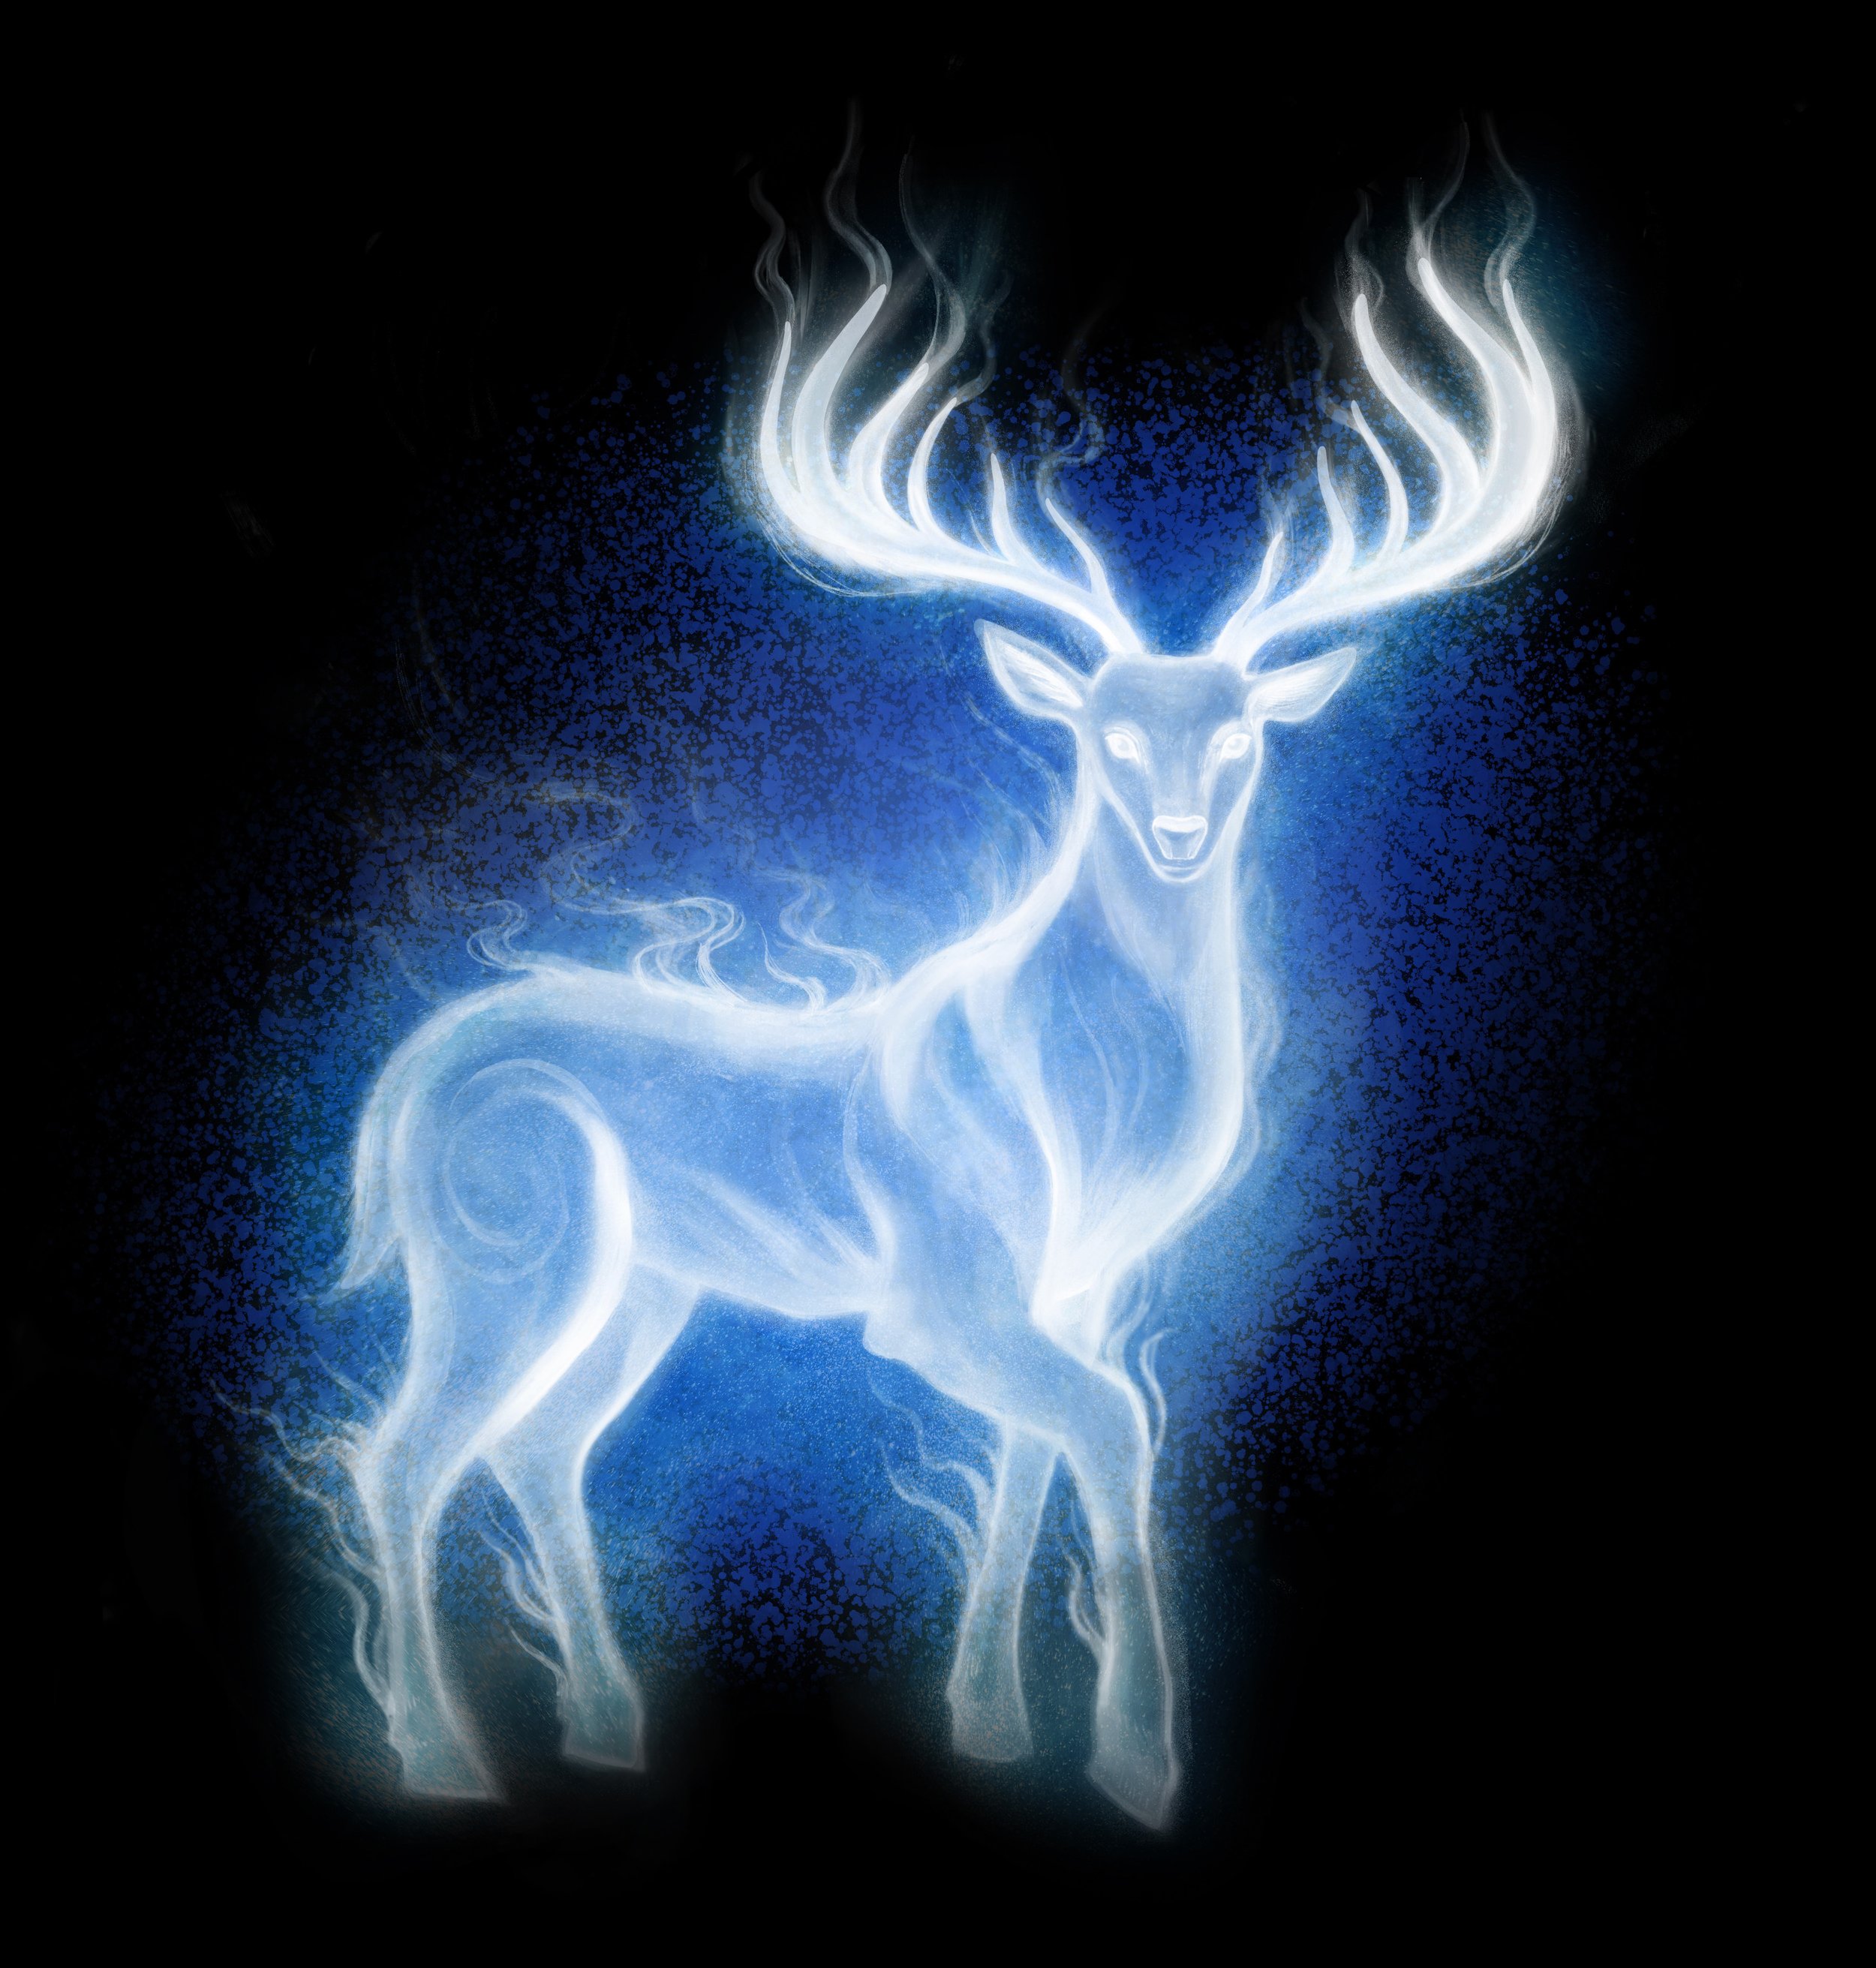  1 of 9 in a series of illustrations of patronus animals; Created for Harry Potter: The Exhibition. Featured globally in kiosk and interactive elements throughout the Exhibition in Philadelphia, New York City, Atlanta, Vienna, and Paris.  Agency: Neo